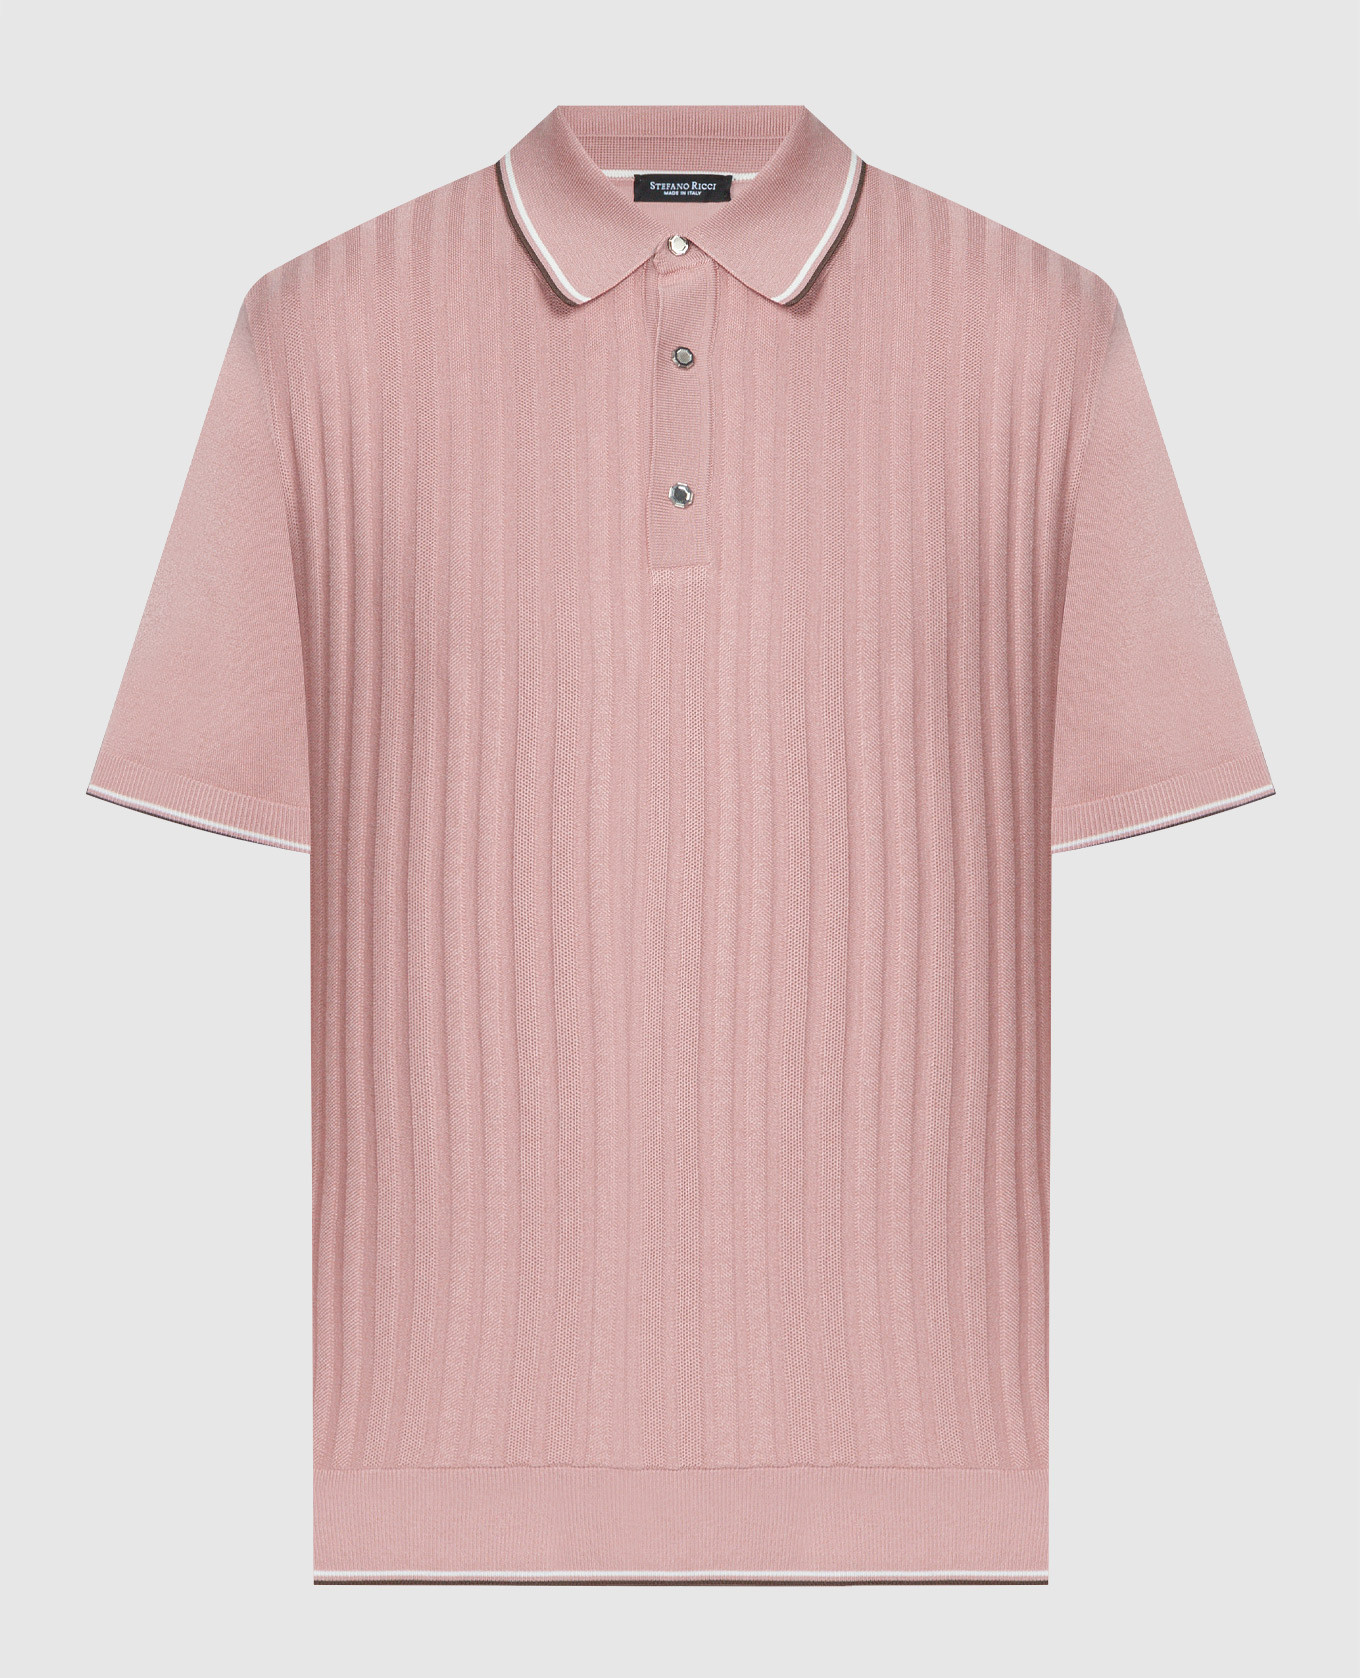 Pink polo shirt with textured pattern